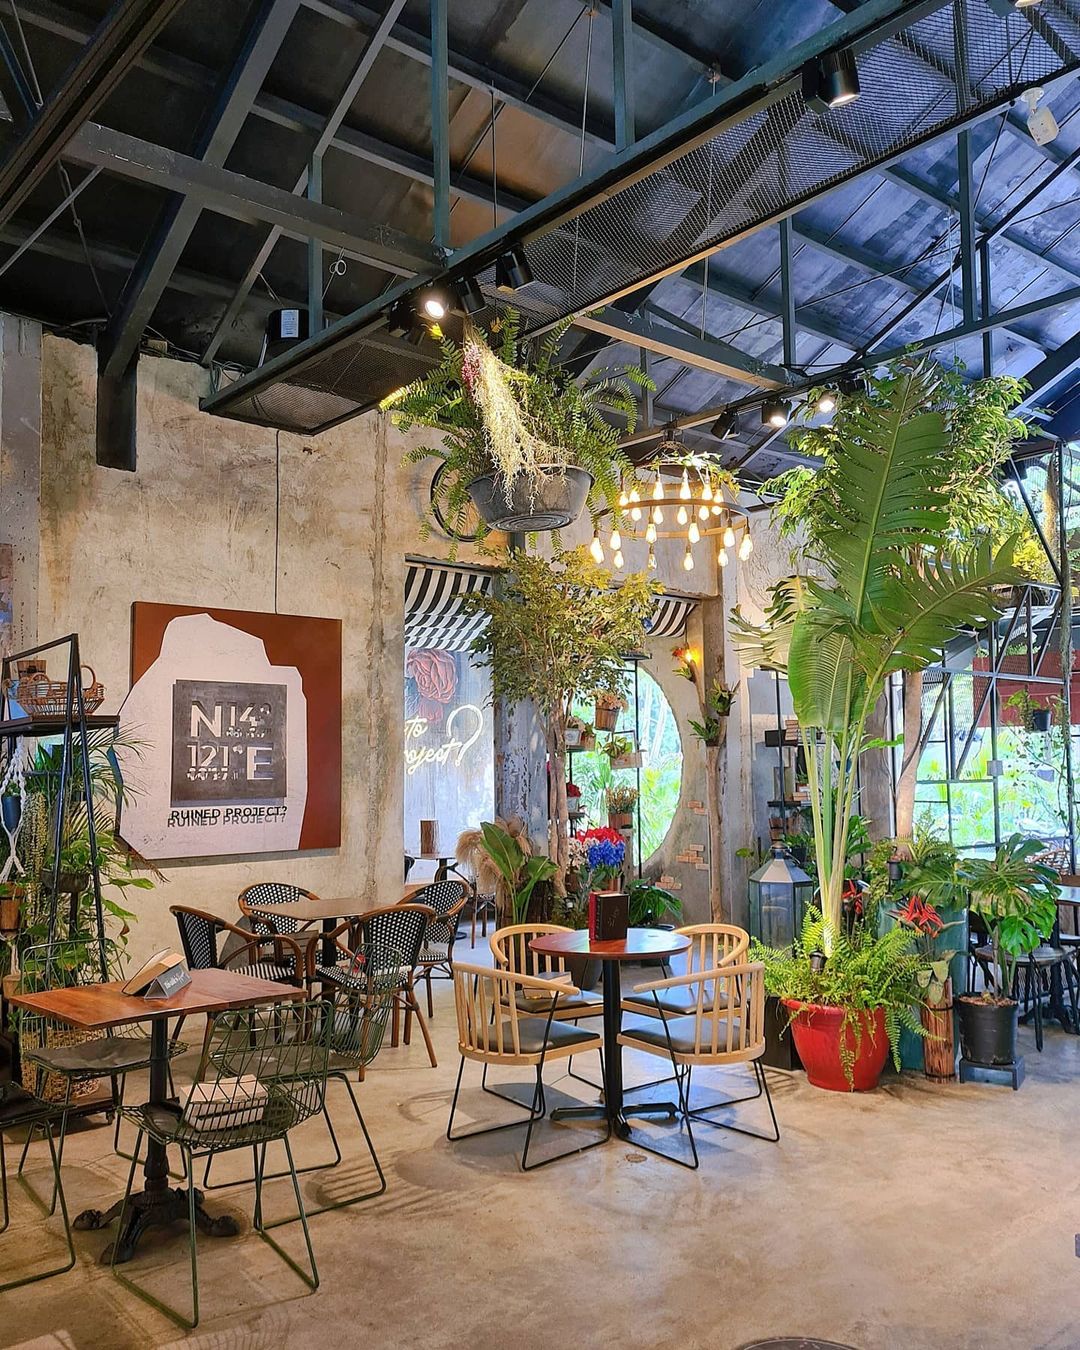 Tagaytay Cafes - Ruined Project